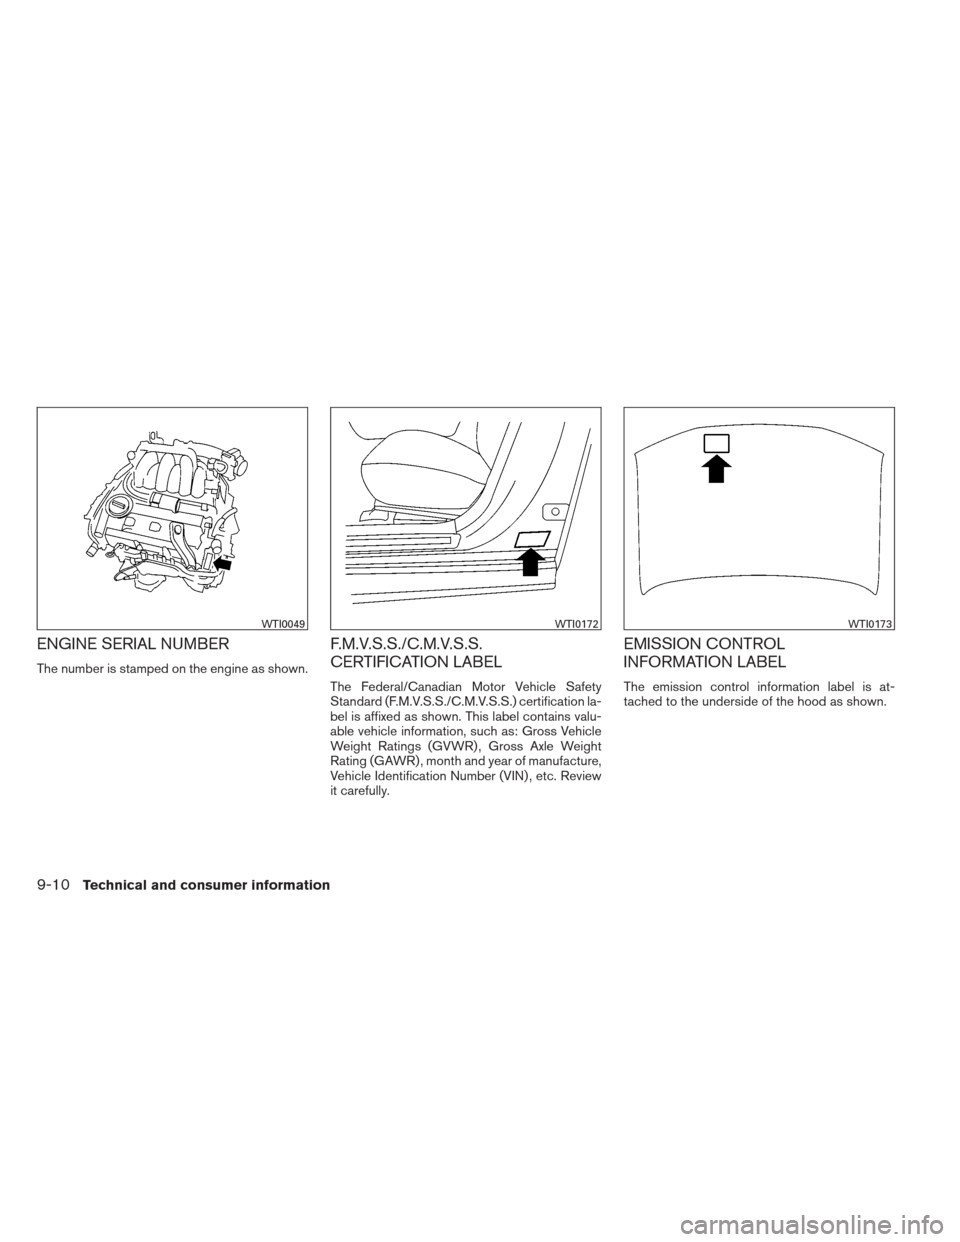 NISSAN MAXIMA 2013 A35 / 7.G Owners Manual ENGINE SERIAL NUMBER
The number is stamped on the engine as shown.
F.M.V.S.S./C.M.V.S.S.
CERTIFICATION LABEL
The Federal/Canadian Motor Vehicle Safety
Standard (F.M.V.S.S./C.M.V.S.S.) certification la